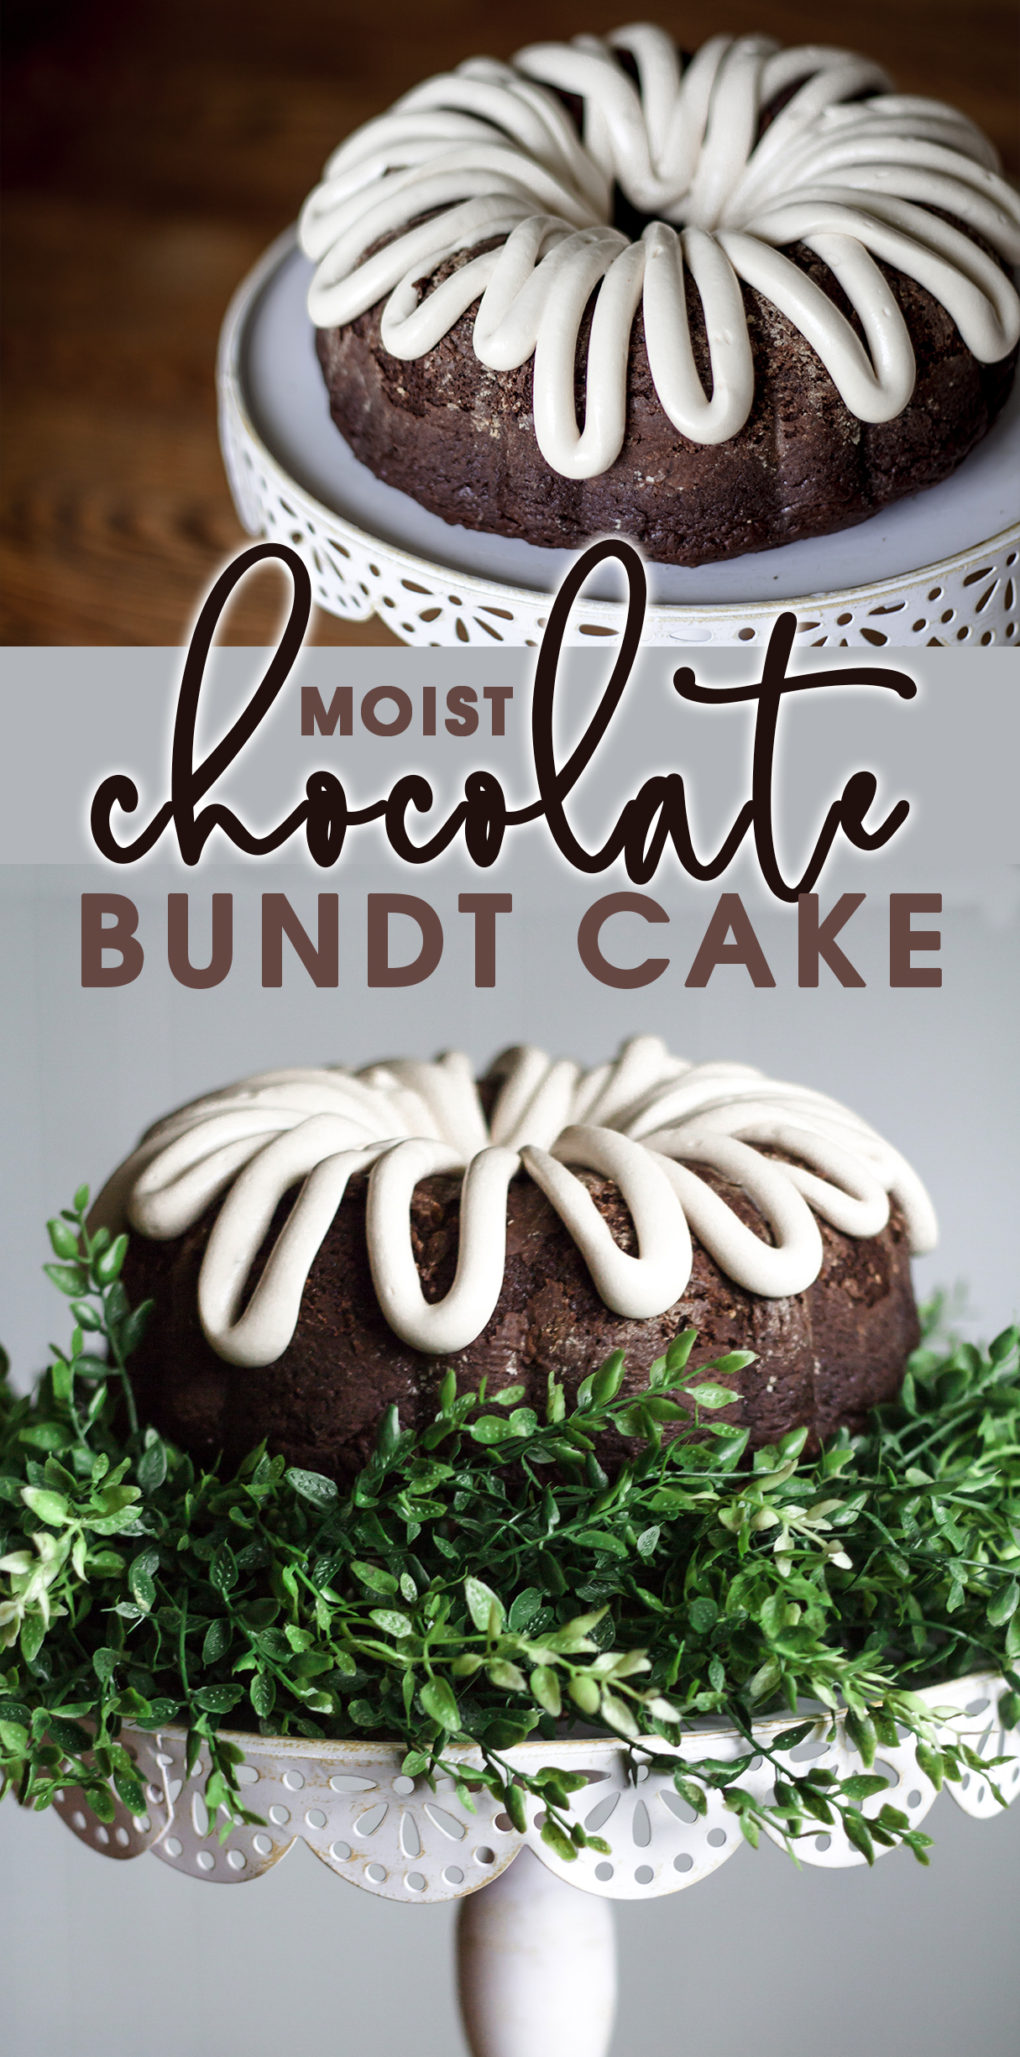 Moist Chocolate Bundt Cake with Cream Cheese Frosting - The Best Chocolate Cake Recipe